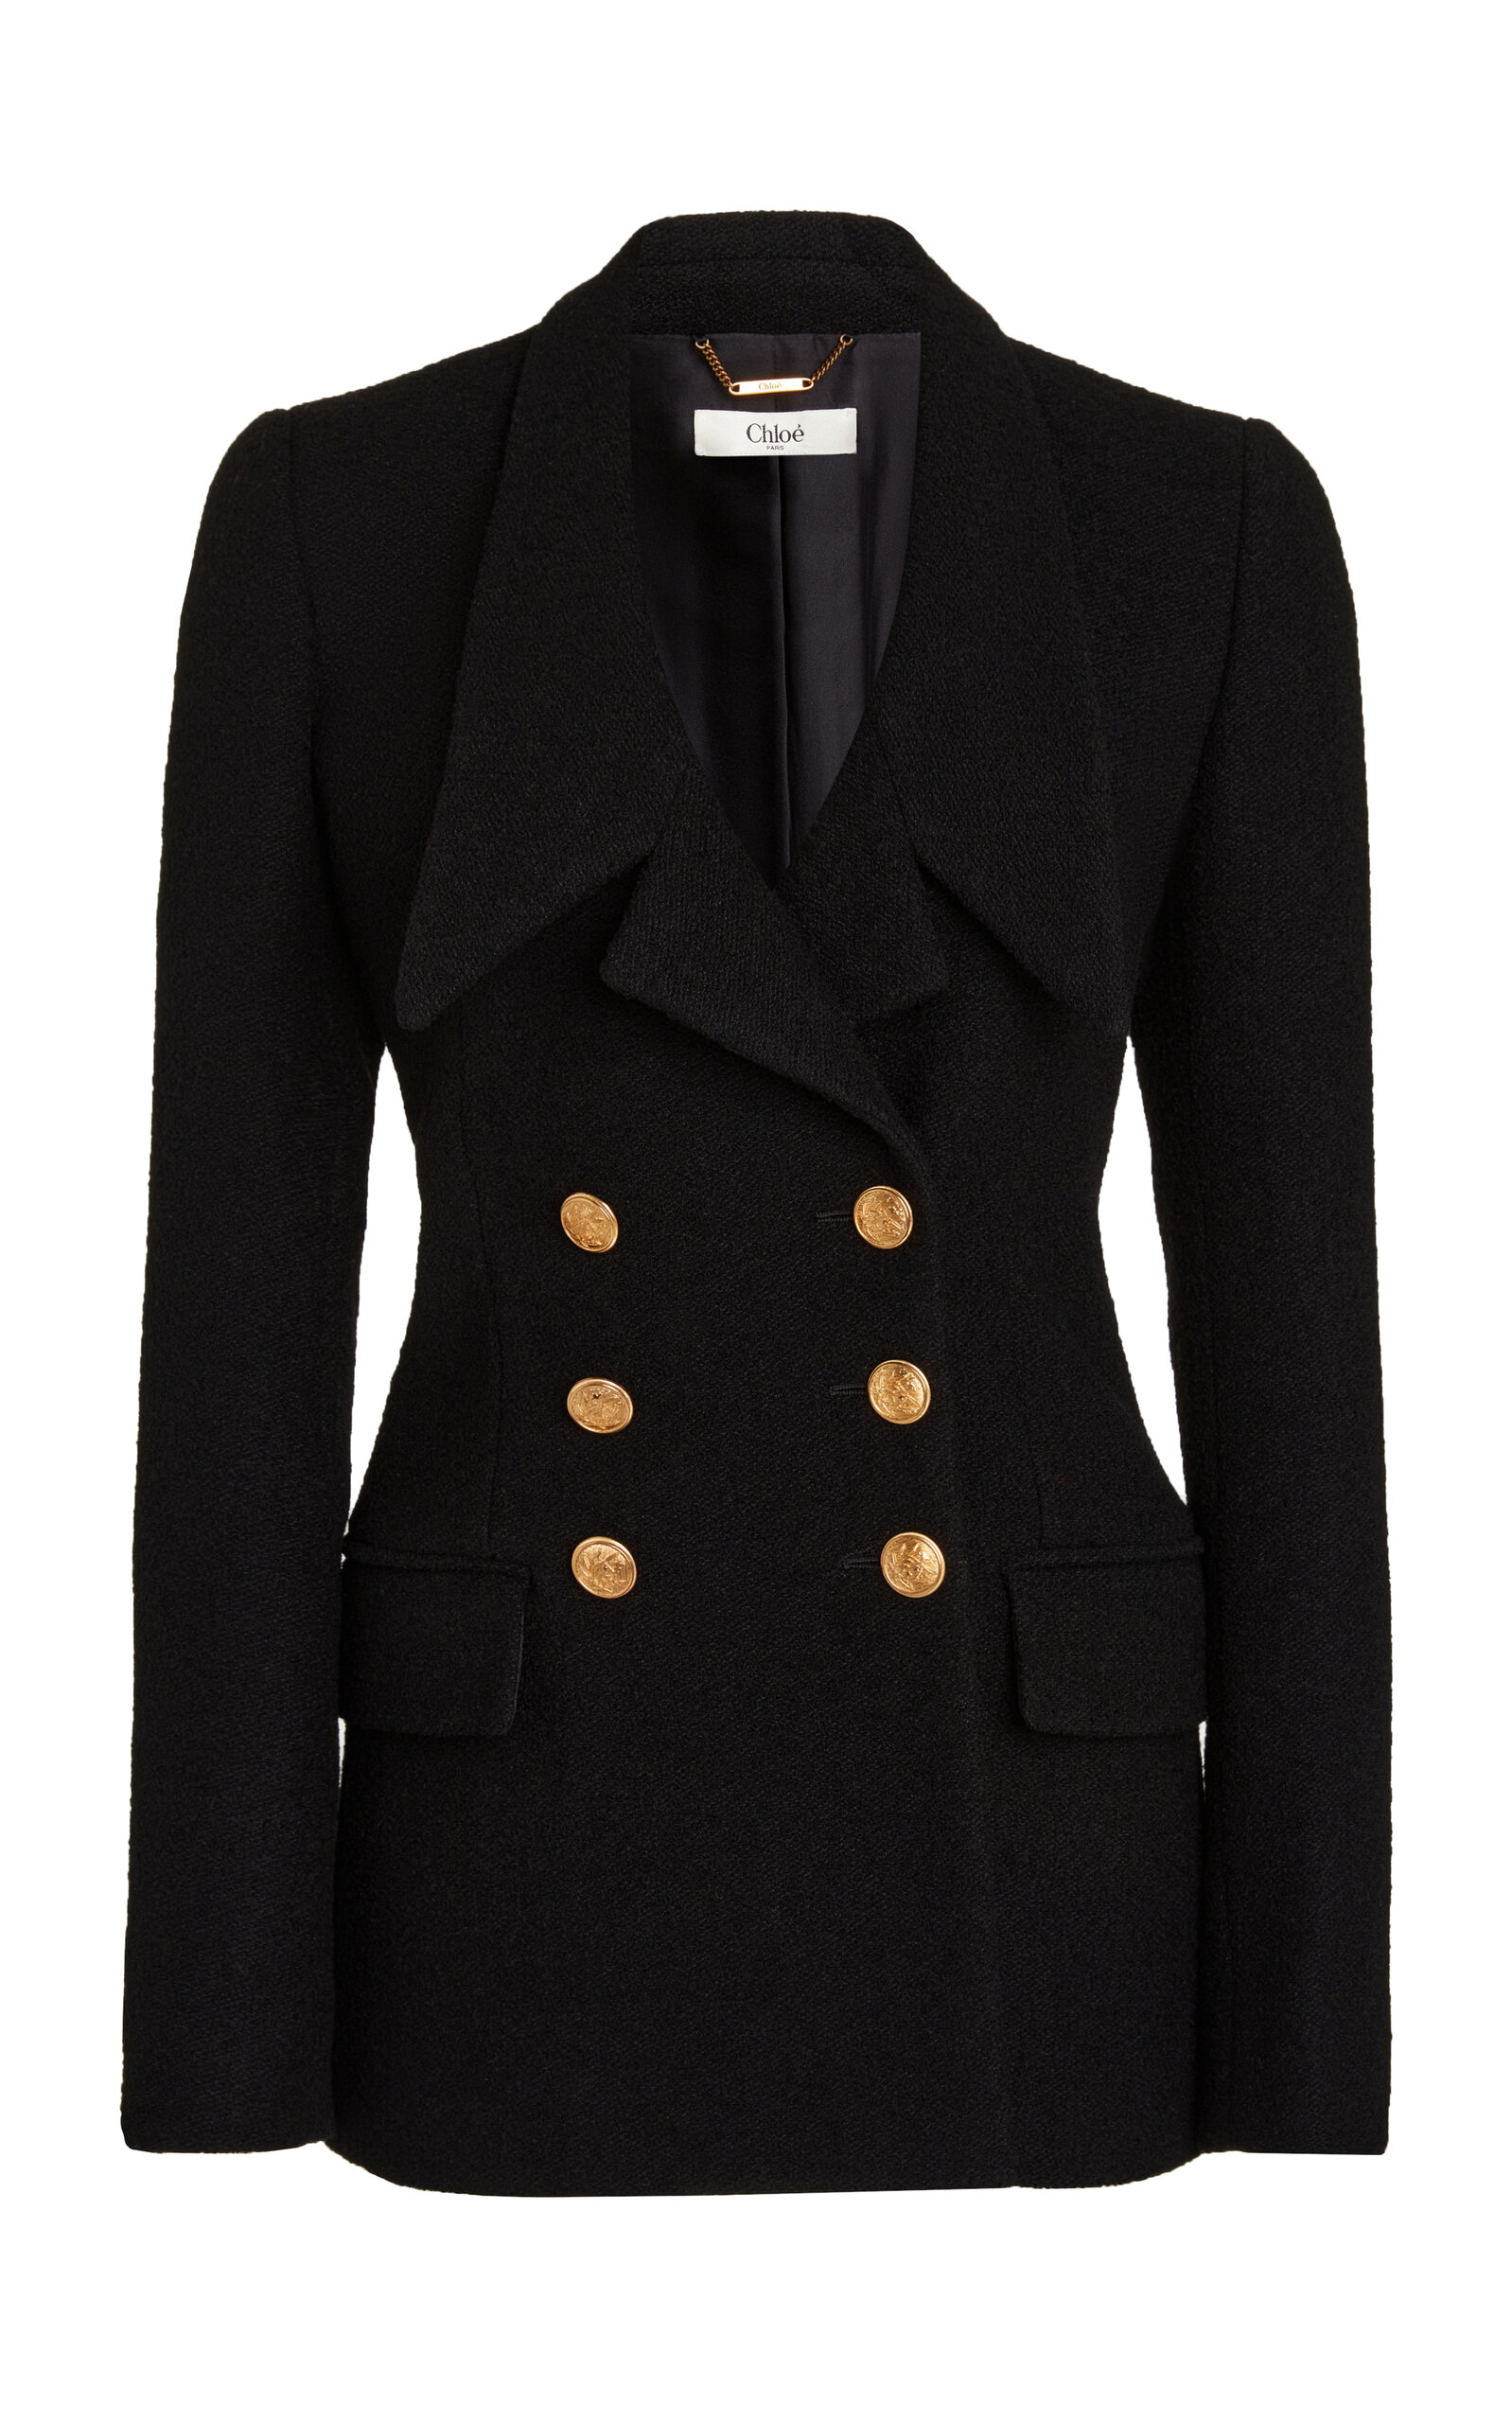 Chloé Double-Breasted Wool-Blend Jacket